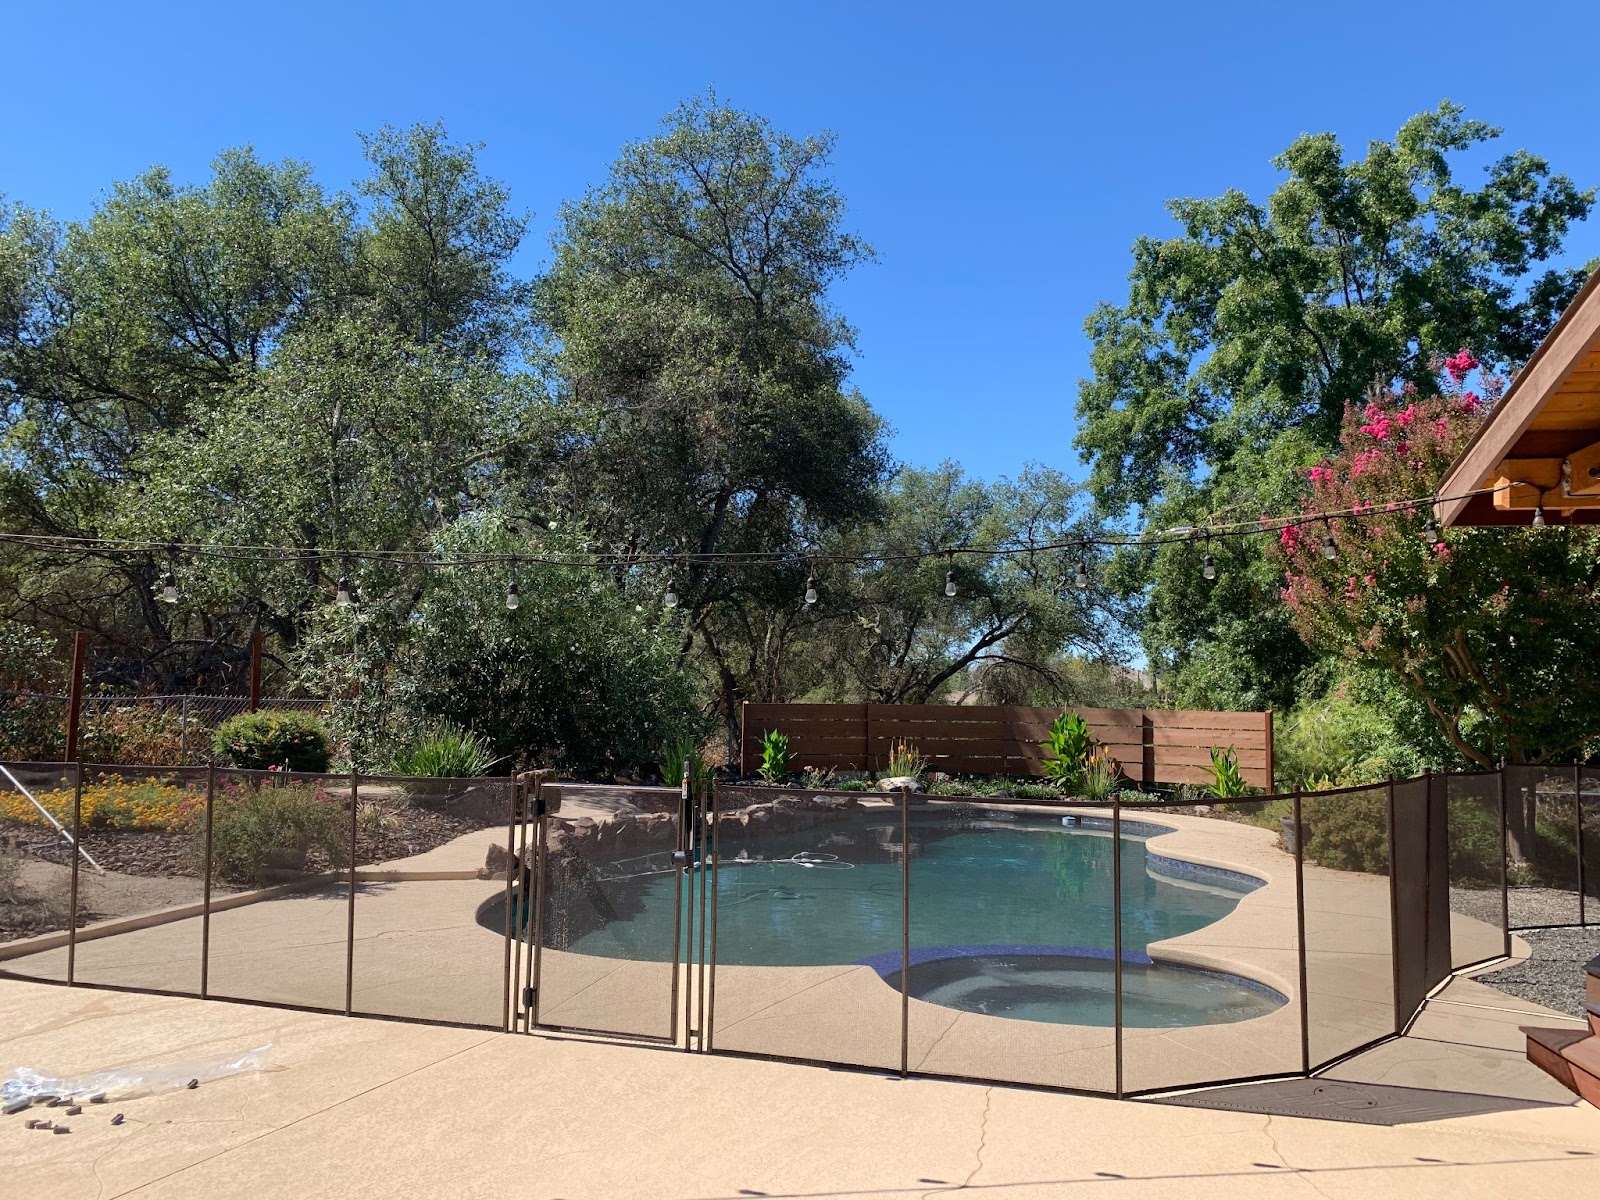 Brown mesh swimming pool fence installed around a residential pool